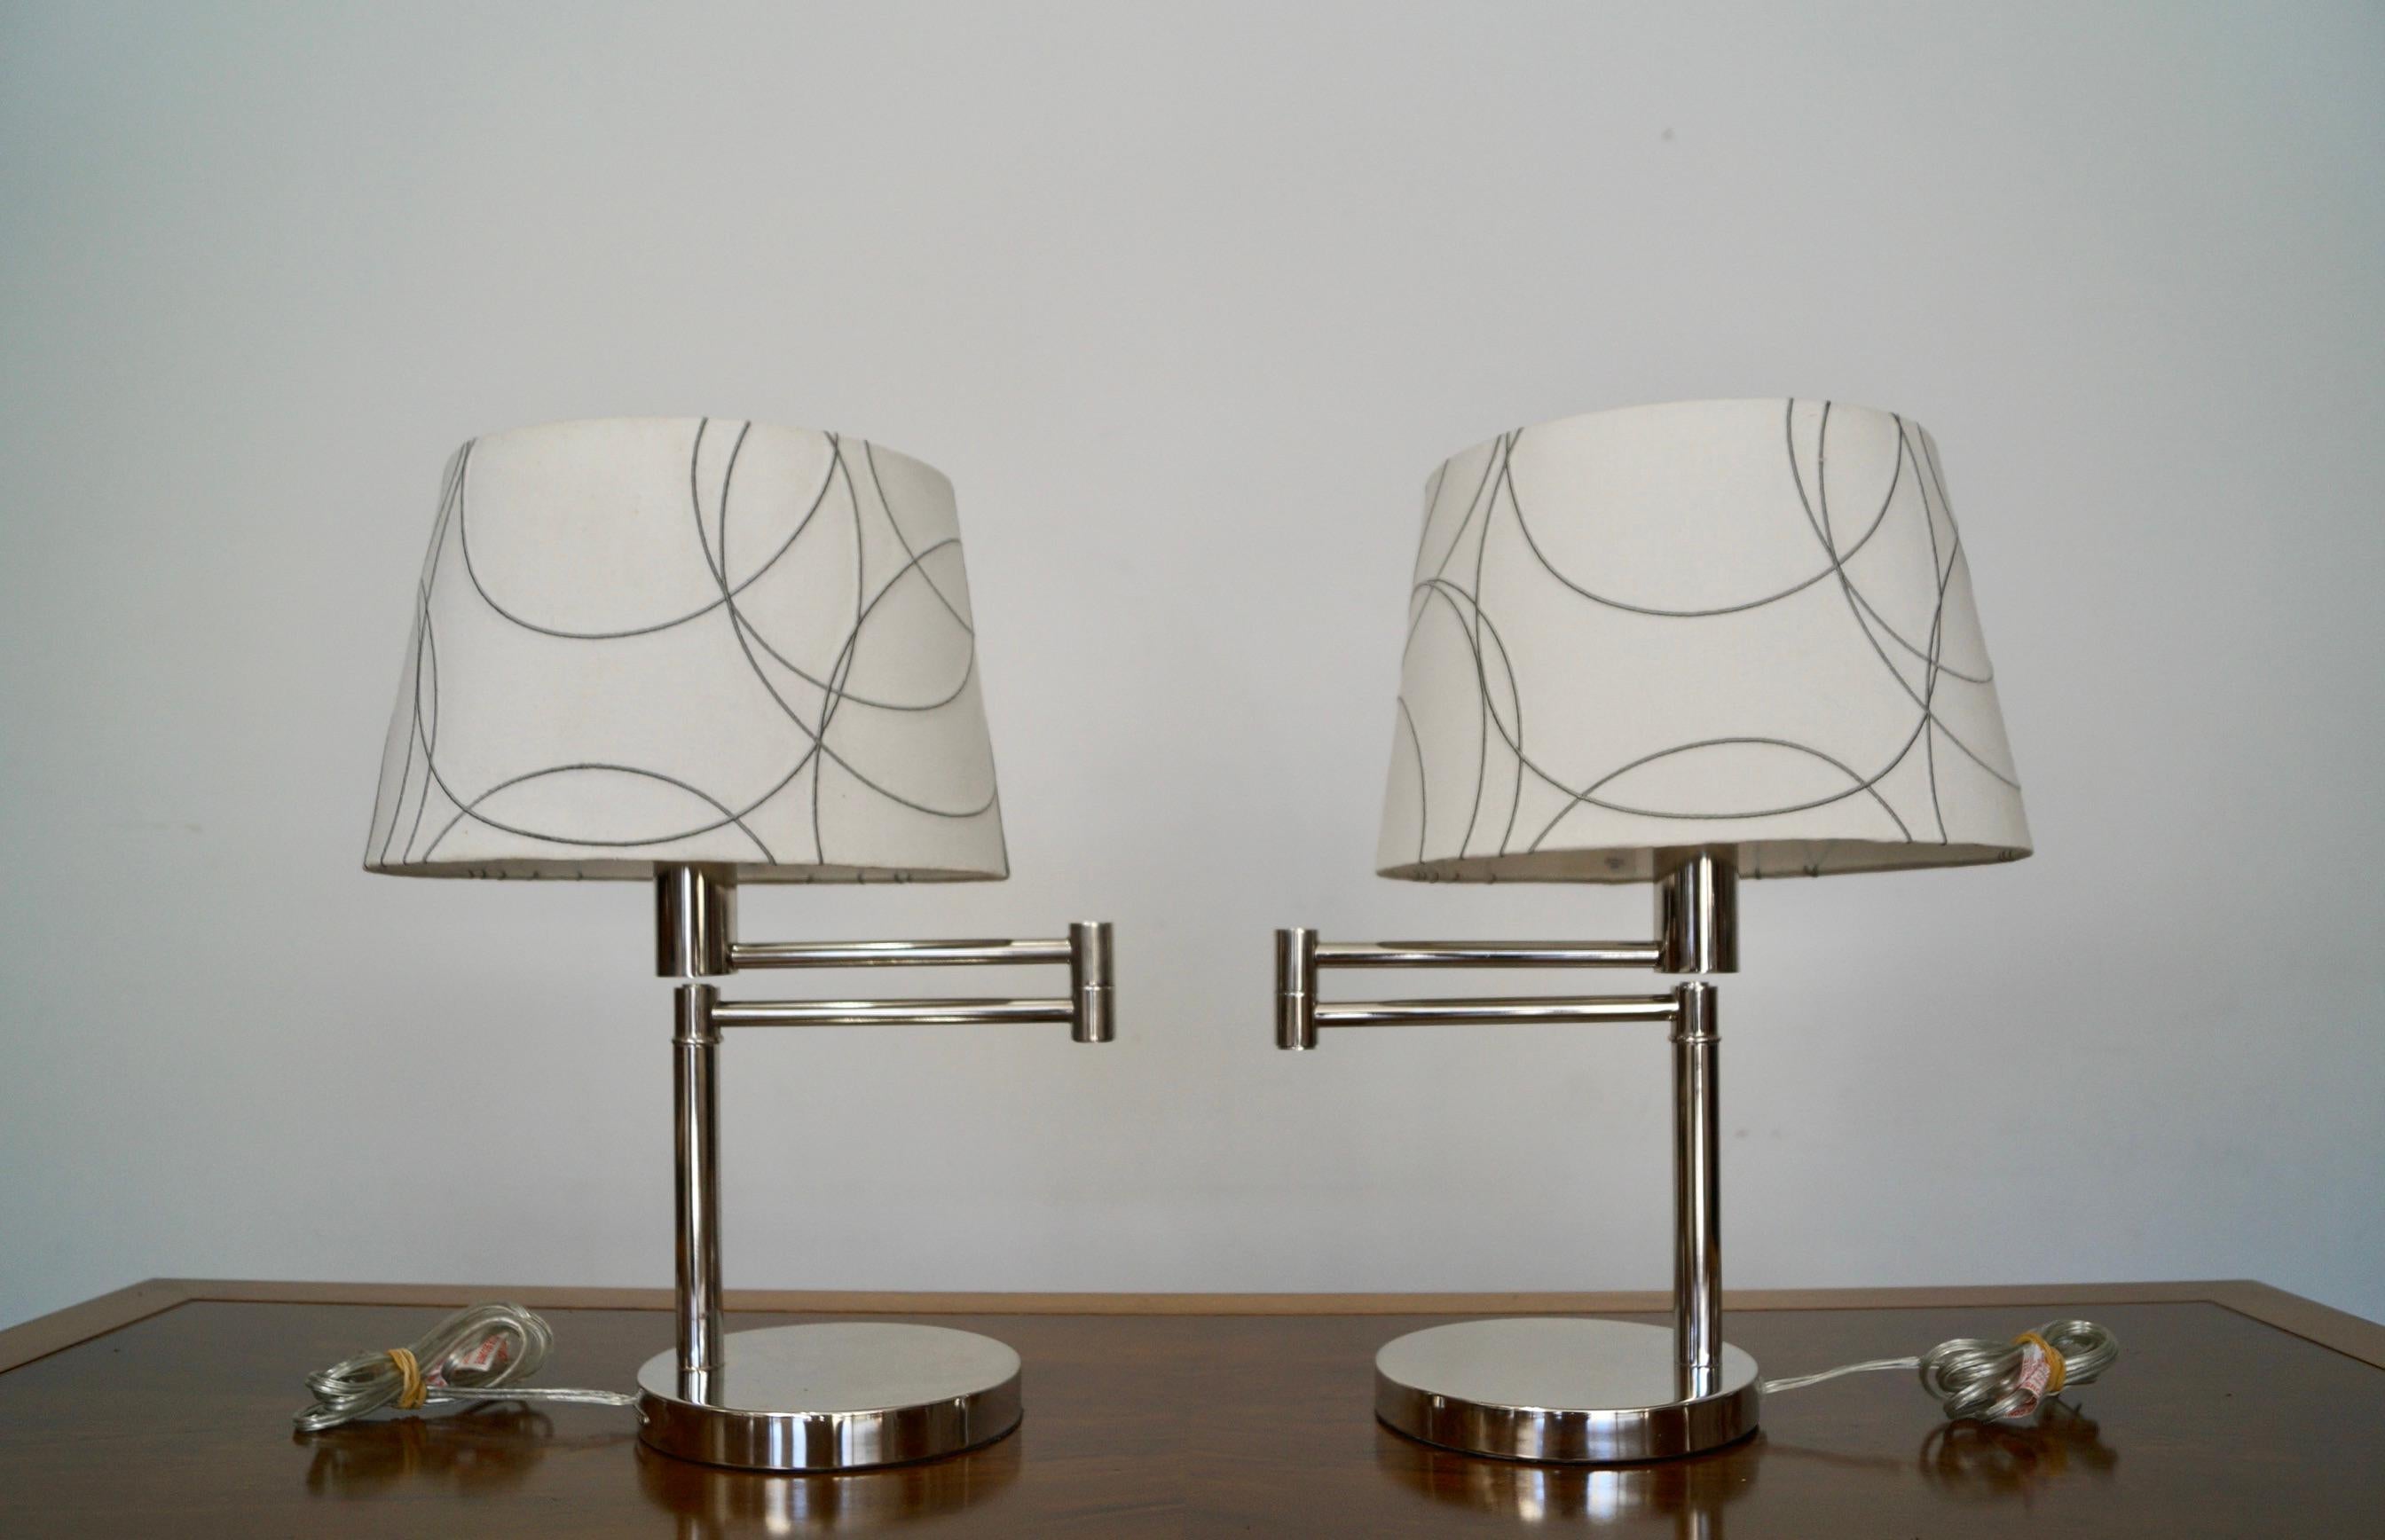 Pair of vintage early 2000’s table lamps for sale. Manufactured by Ralph Lauren, and very well made. They are made of chrome, and are swing-arm lamps with the original noughties shade. The lamps are in excellent condition, as are the original post